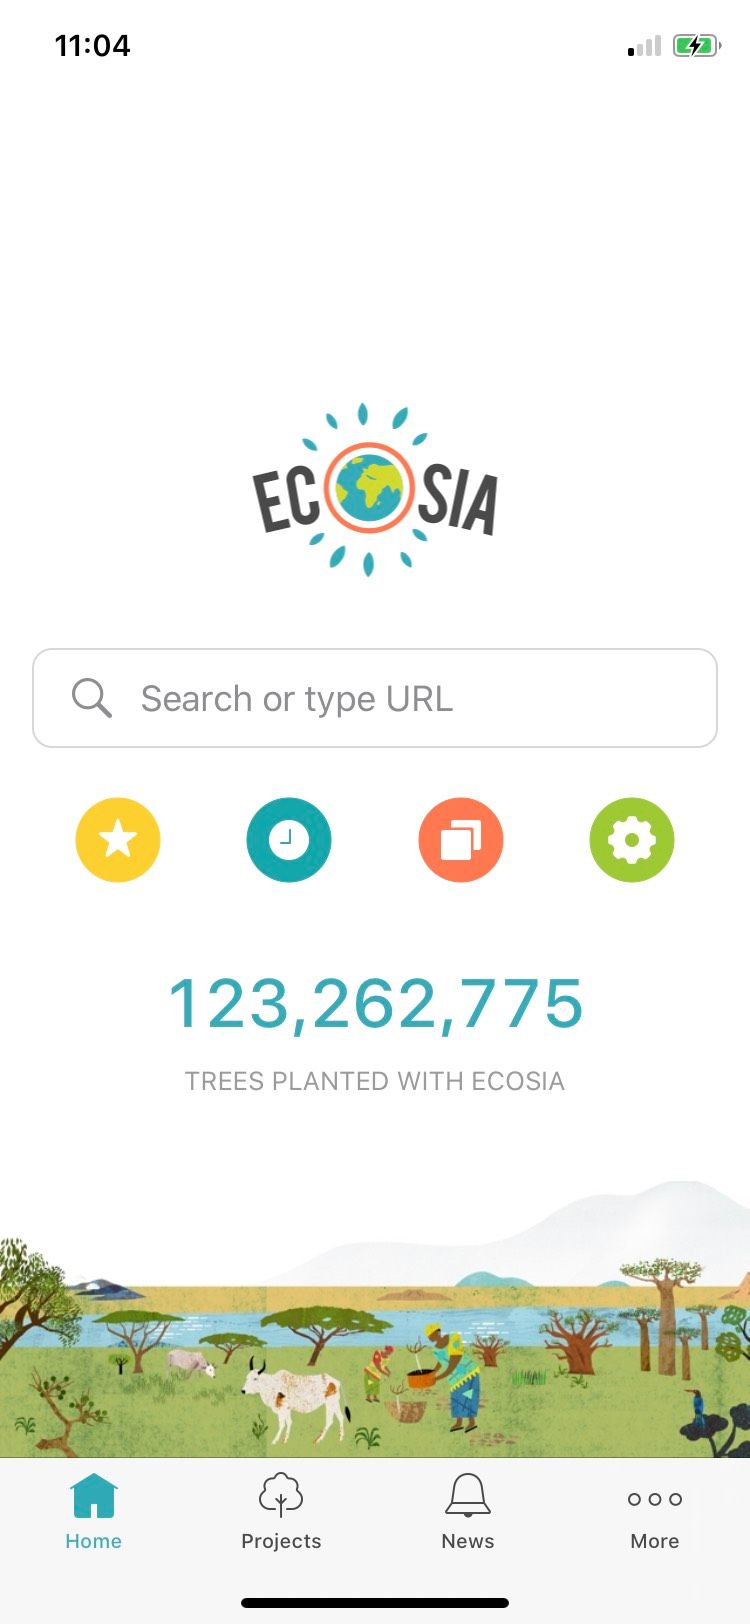 Ecosia's startup page.